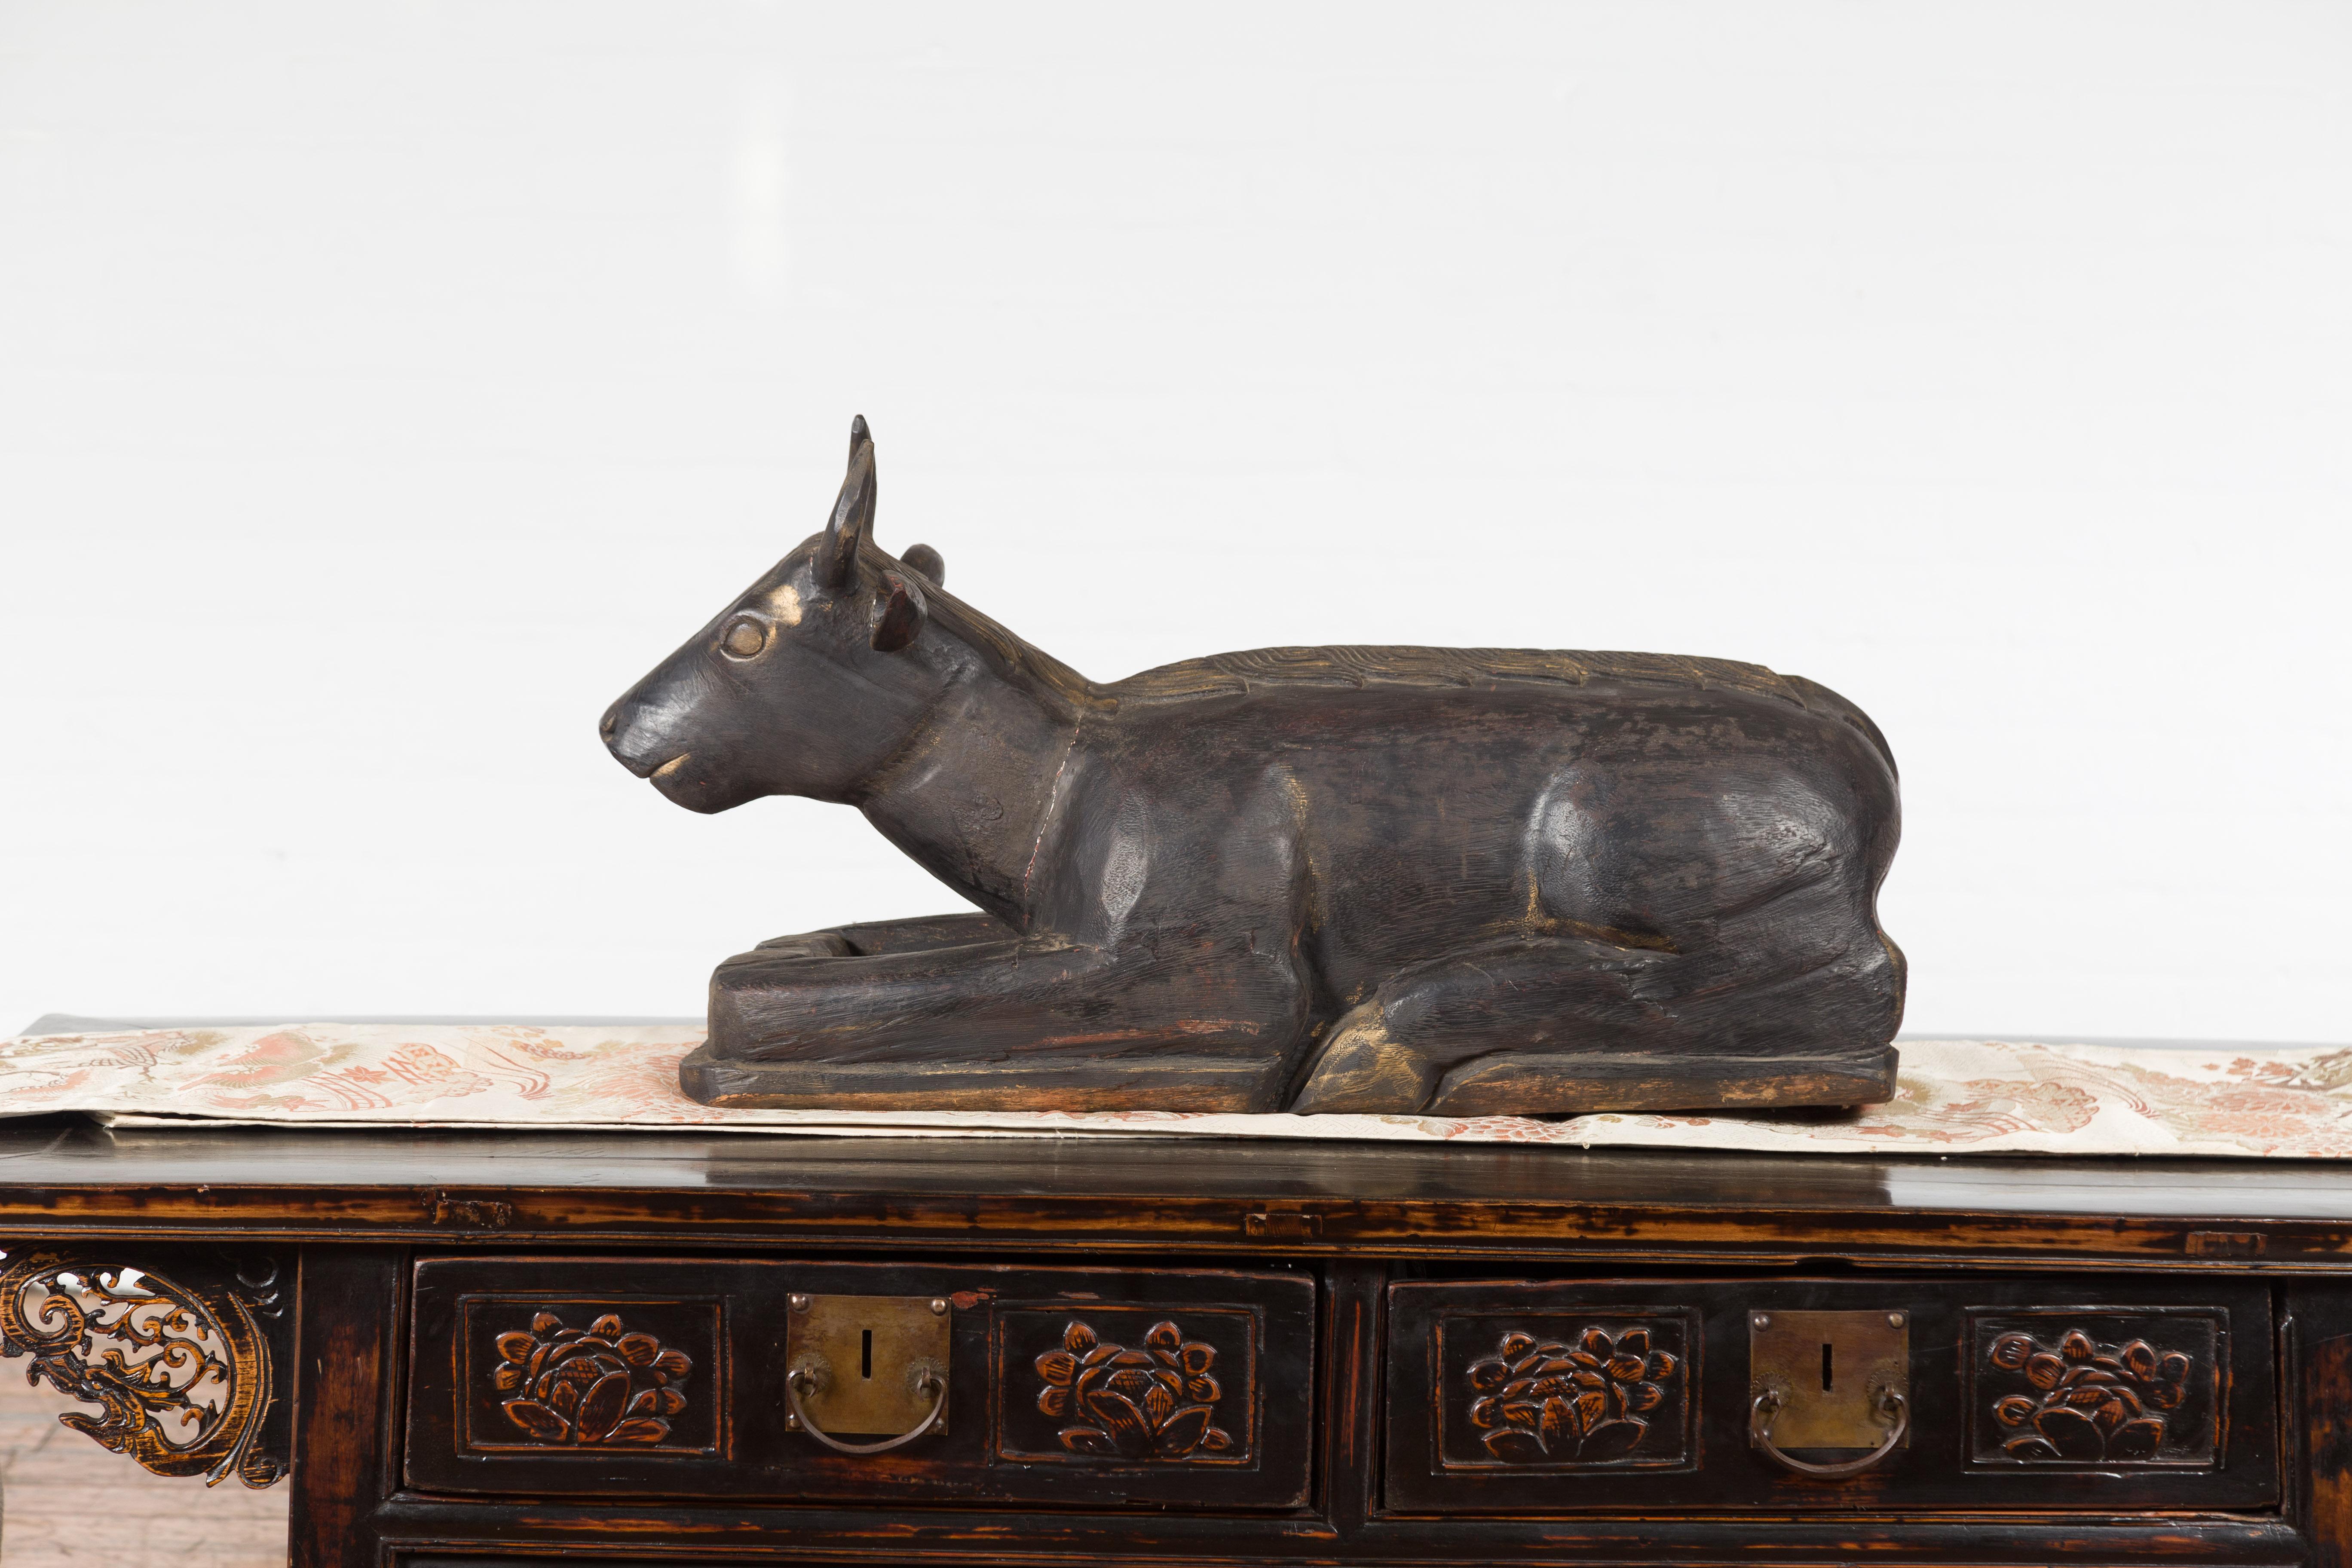 An Indian vintage Nandi bull sculpture from the mid 20th century, with carved motifs and dark patina. Created in India during the mid 20th century, this carved wooden sculpture features Nandi, son of the sage Shilada. Depicted as a bull, Nandi is